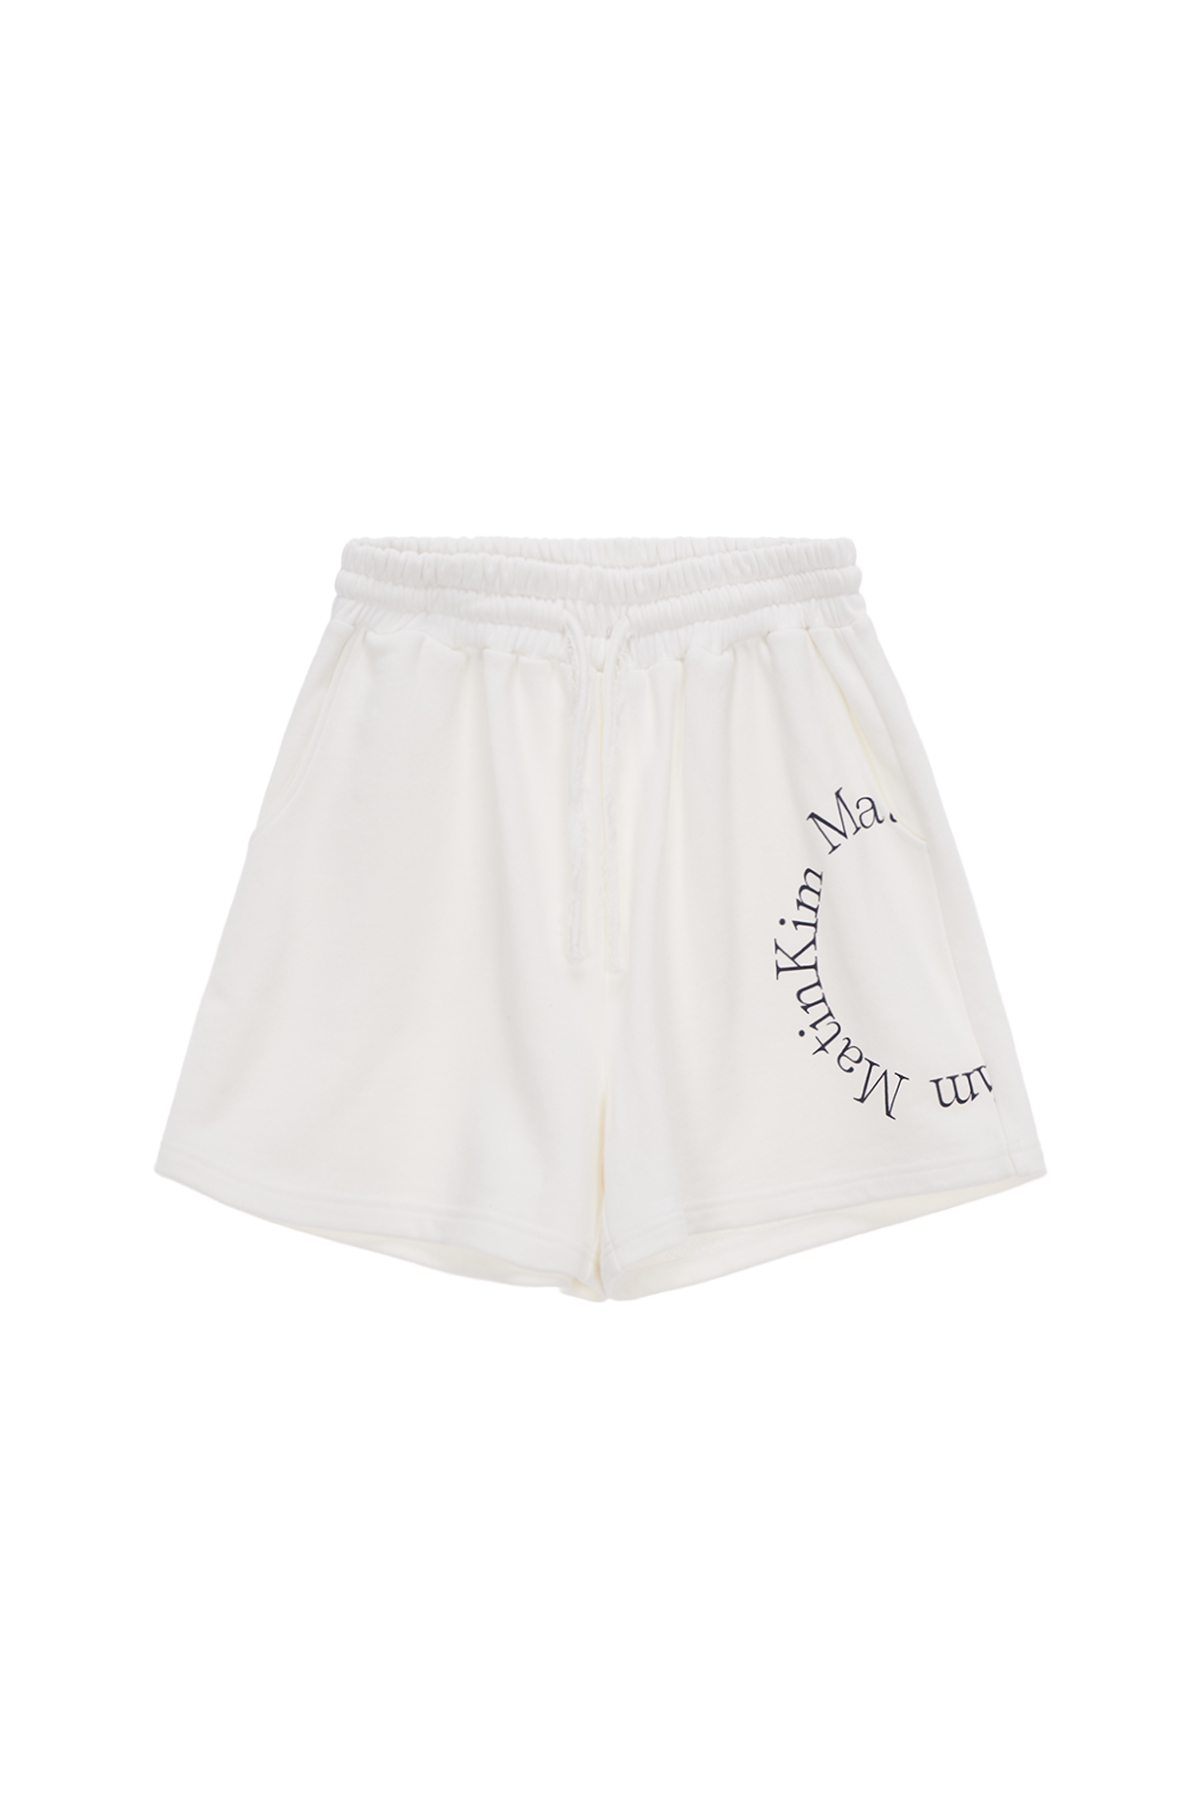 MATIN SOLID LOGO SHORTS IN WHITE